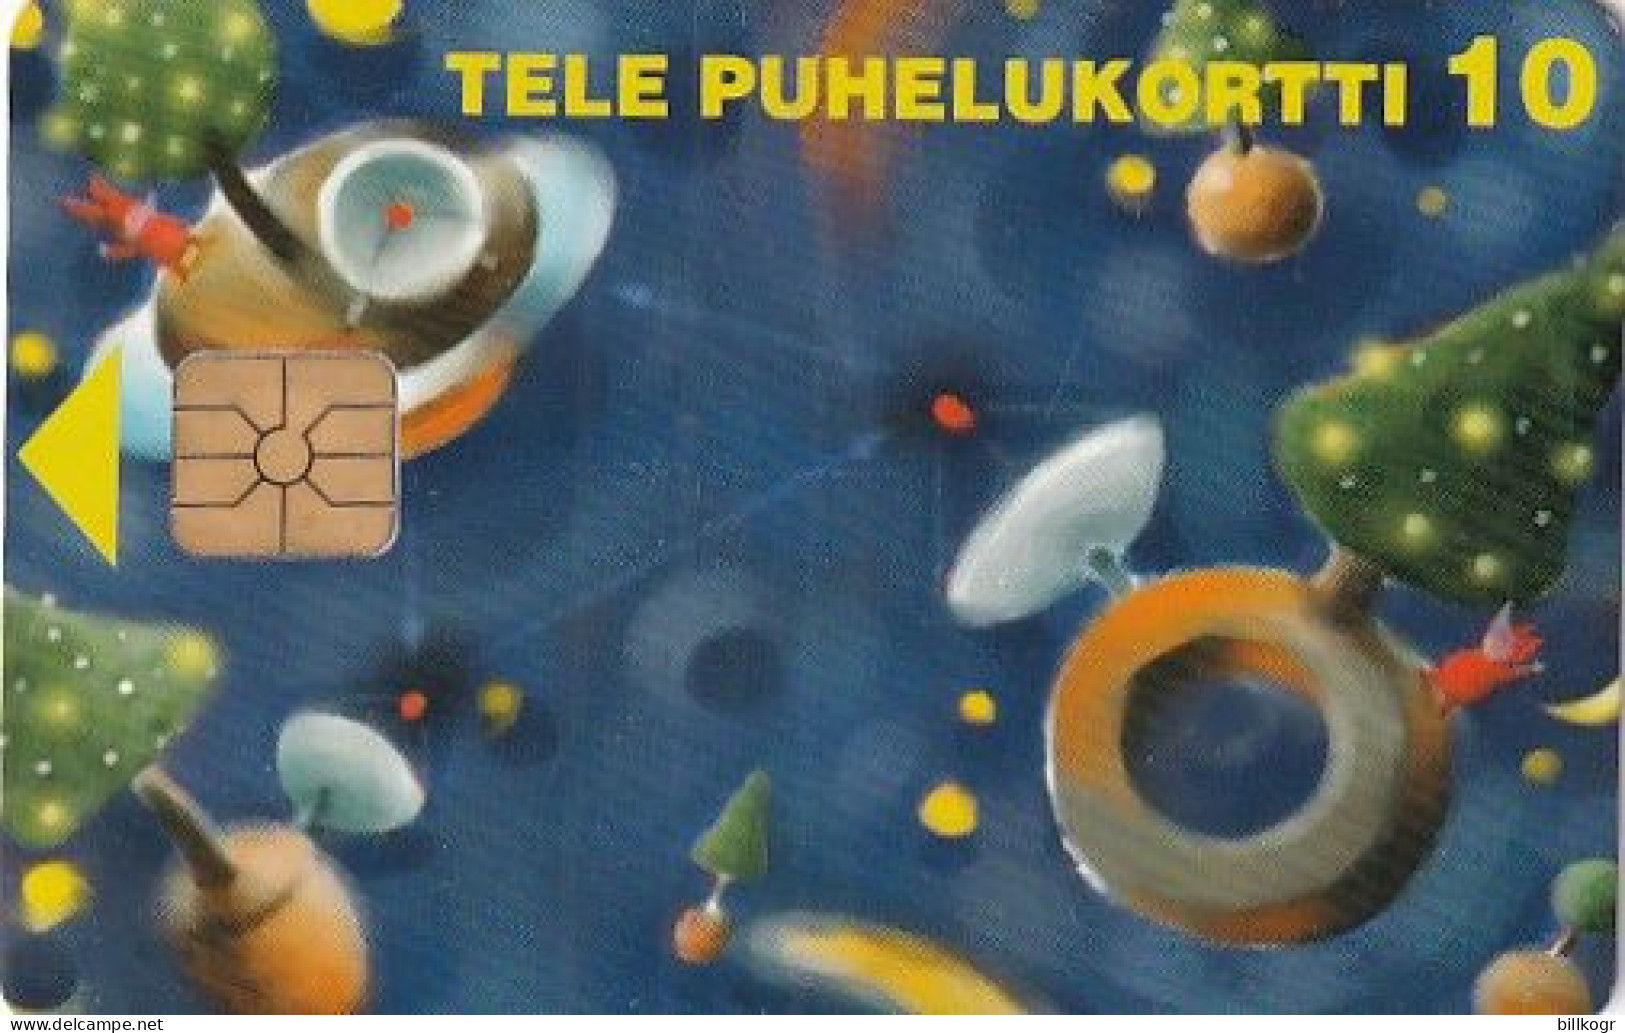 FINLAND - Messages In Space, Christmas 1996, Tirage 10000, 11/96, Used - Finlandia